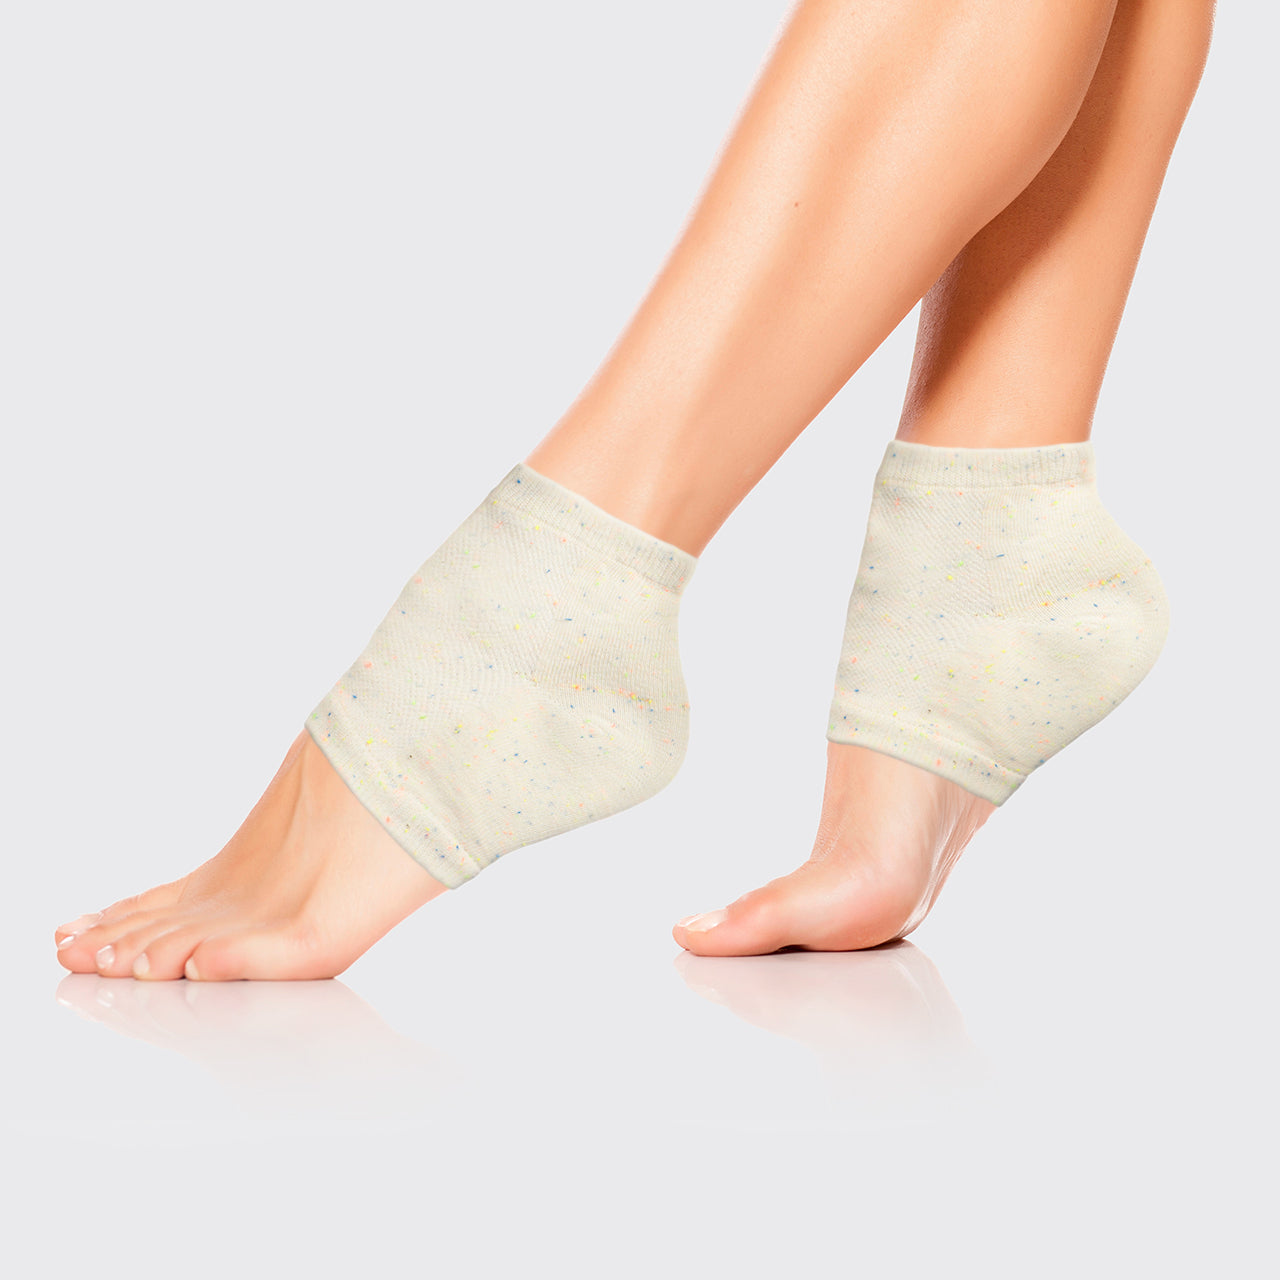 Moisturizing Spa Socks by KITSCH - Lotus and Willow